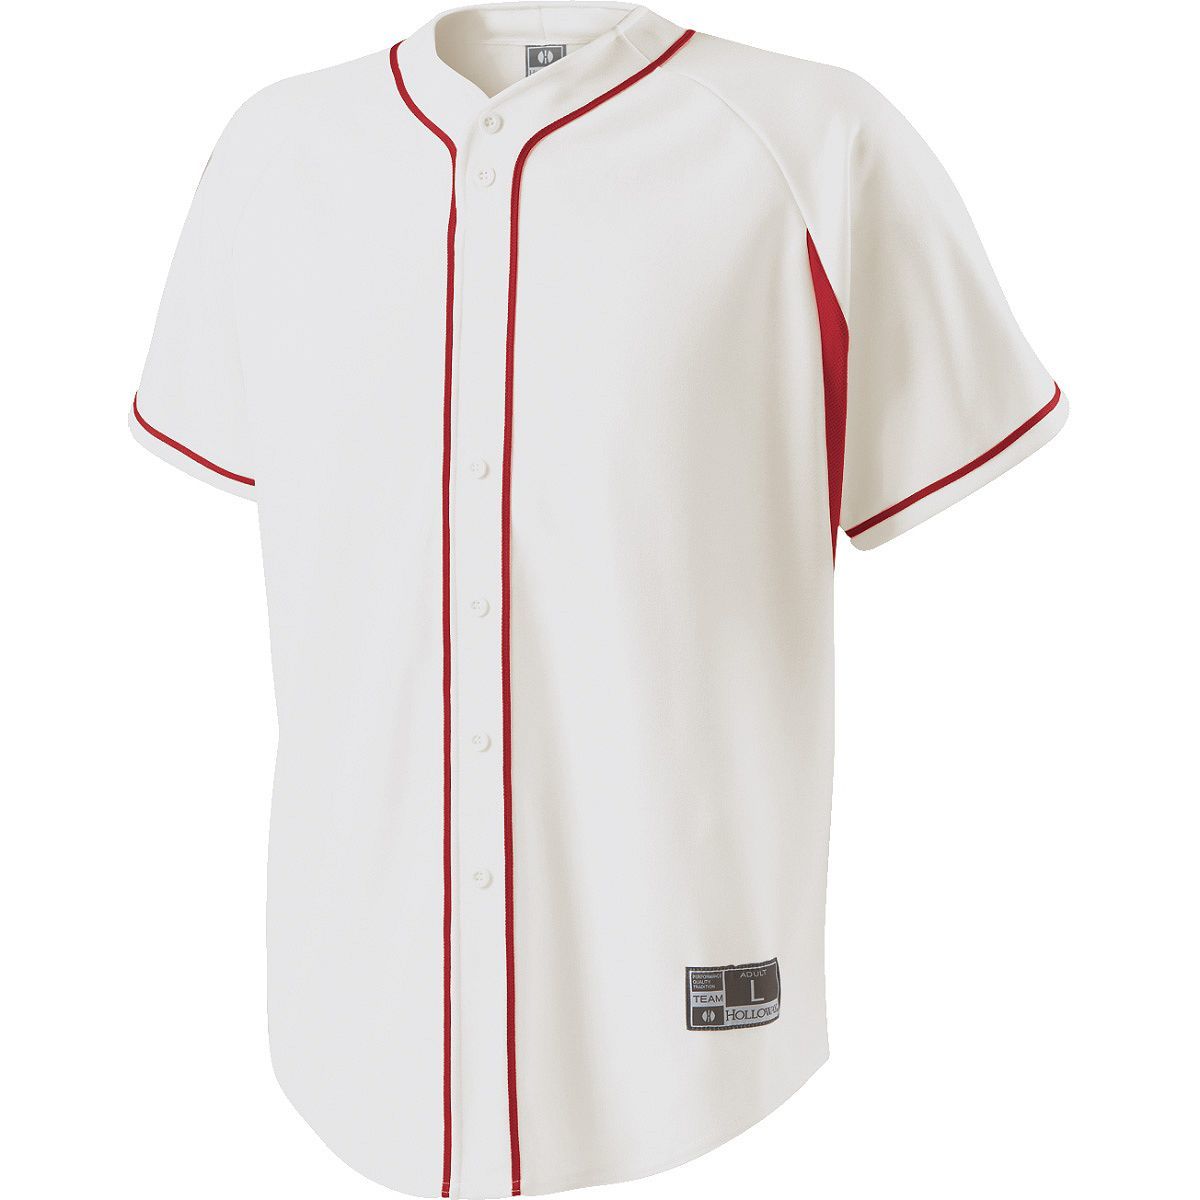 Holloway Youth Ignite Jersey in White/Scarlet  -Part of the Youth, Youth-Jersey, Baseball, Holloway, Shirts, All-Sports, All-Sports-1 product lines at KanaleyCreations.com